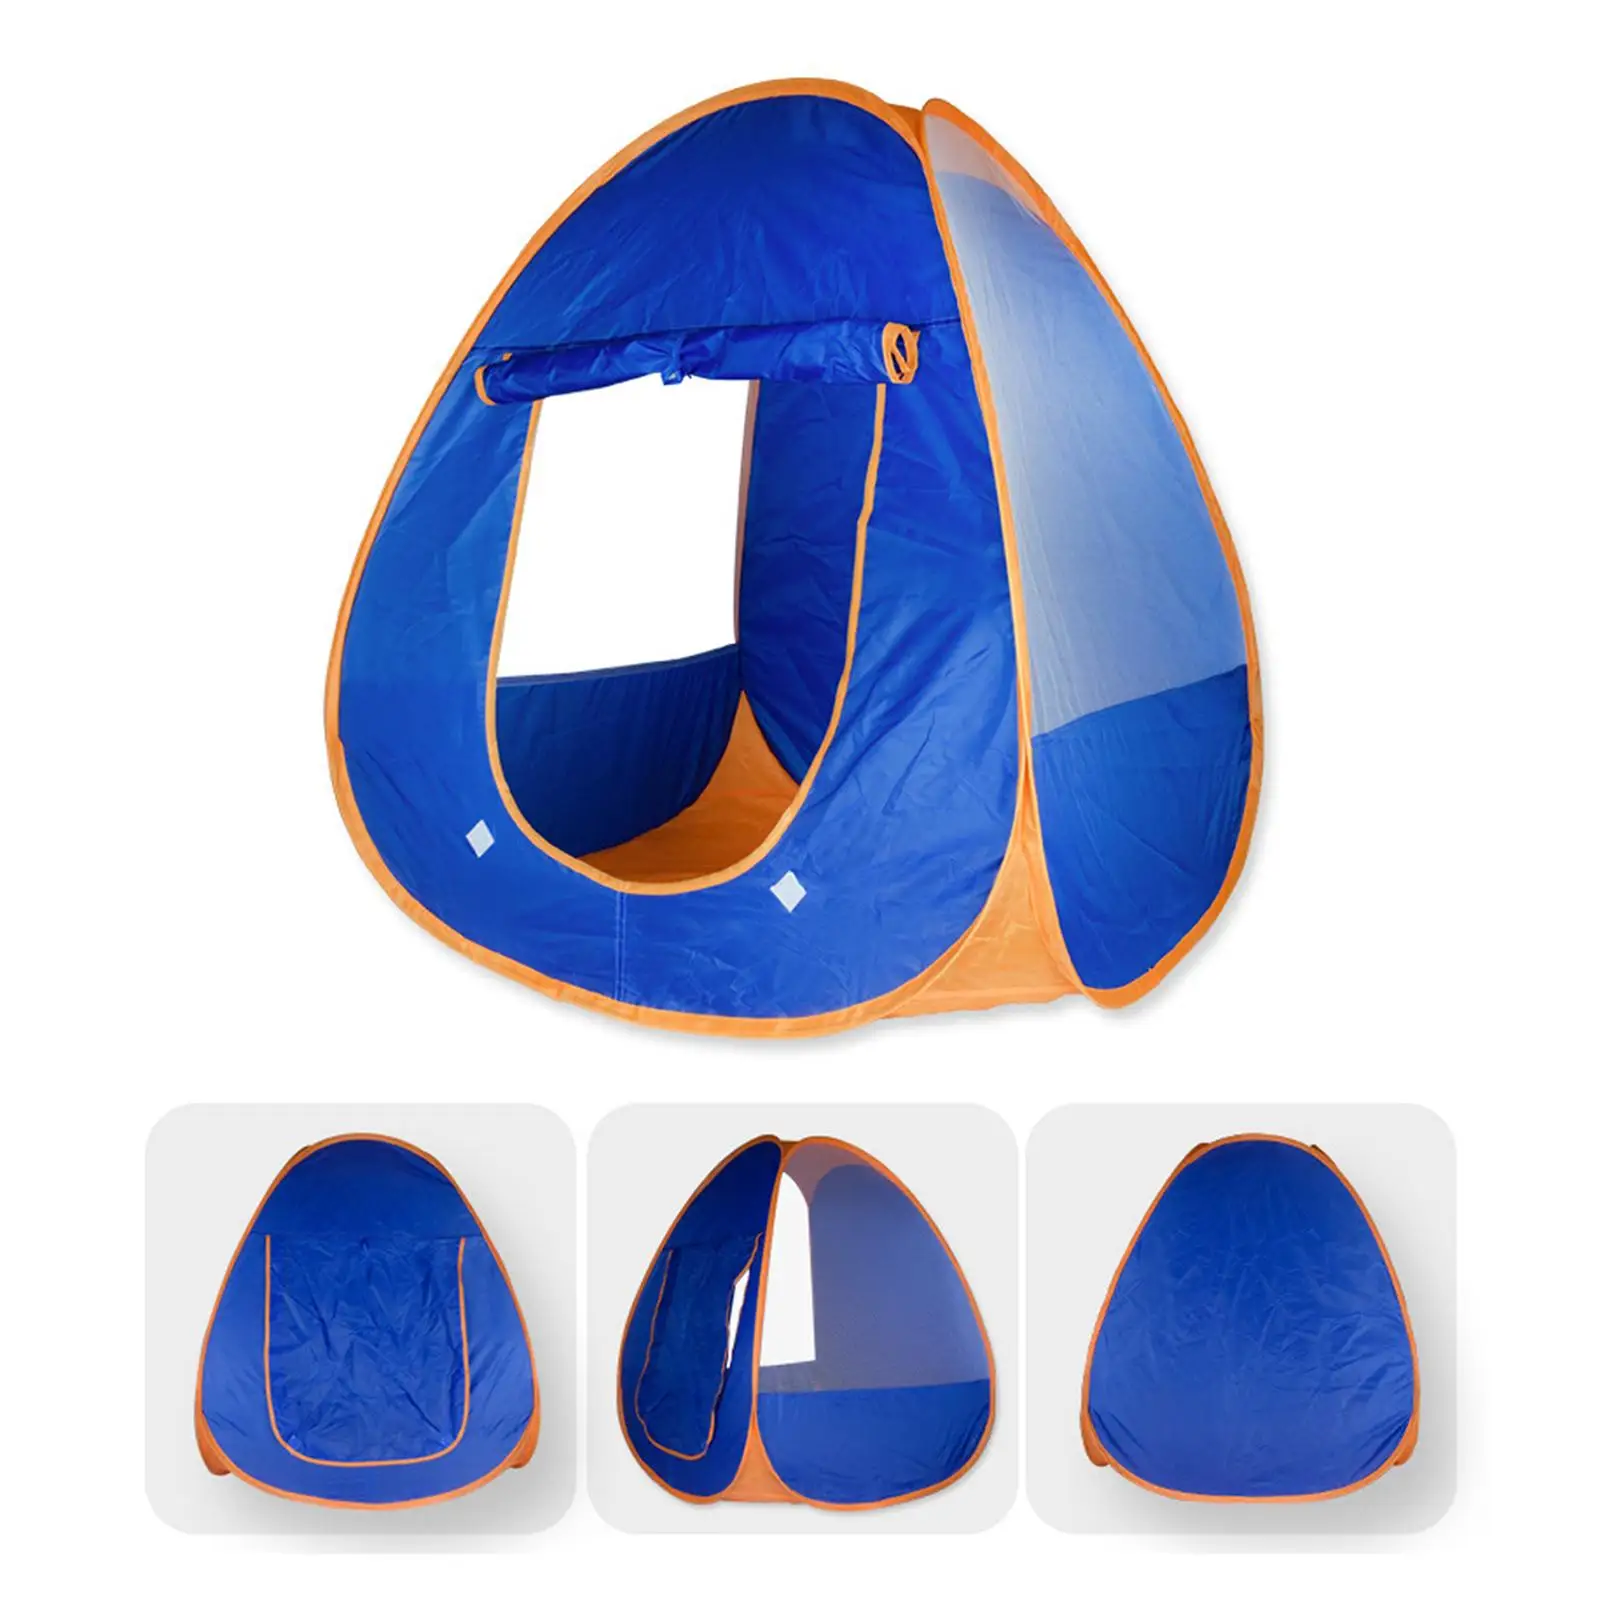 Children Play Tent Foldable Play Mat Pretend Play Portable Christmas Gifts for Indoor Outdoor Party Nursery Room Beach Camping